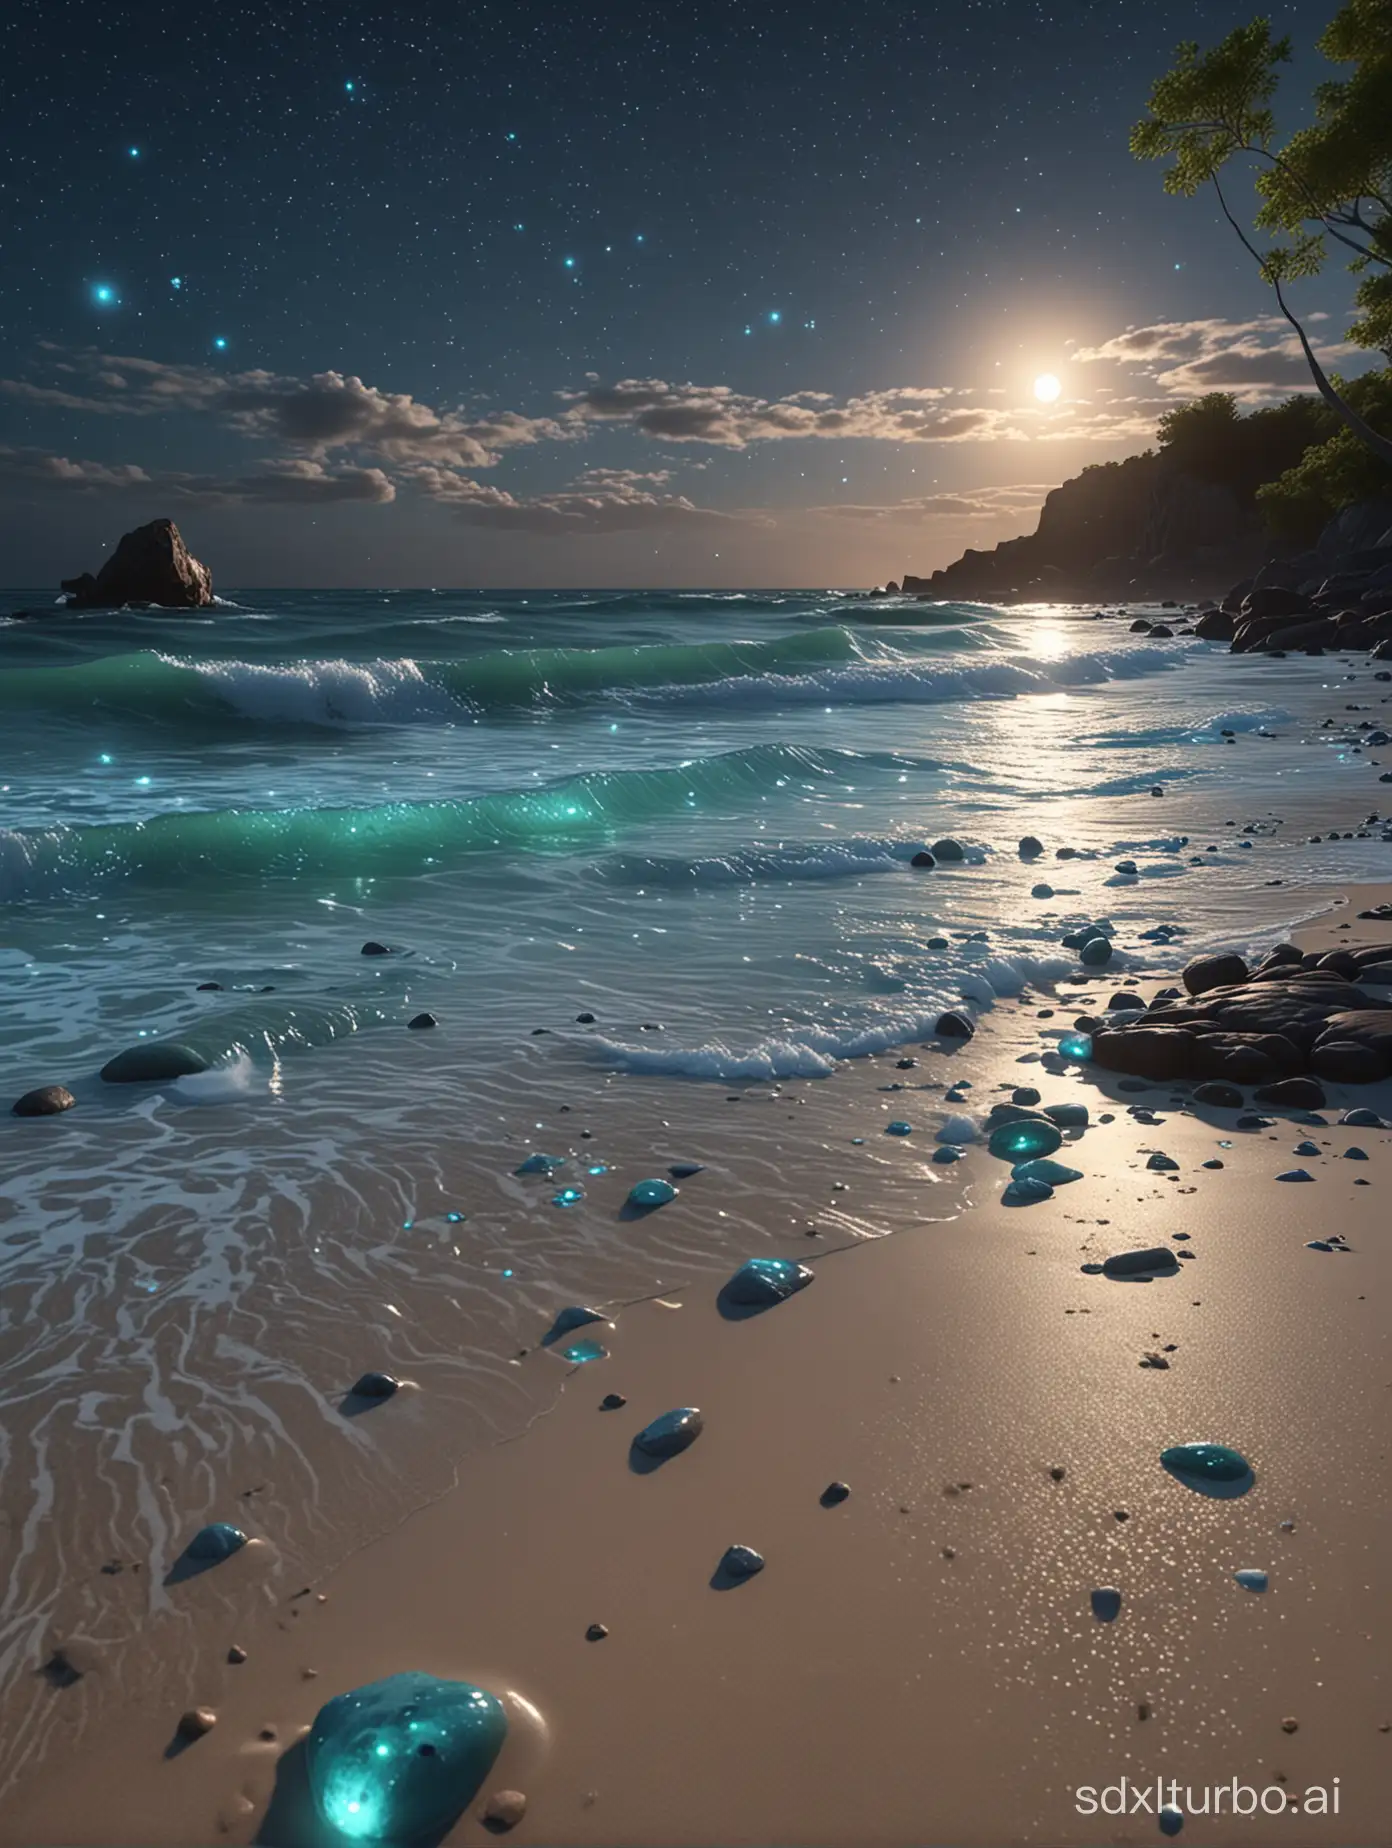 Starry-Night-Beach-with-Luminous-Quicksand-and-Moonlit-Petals